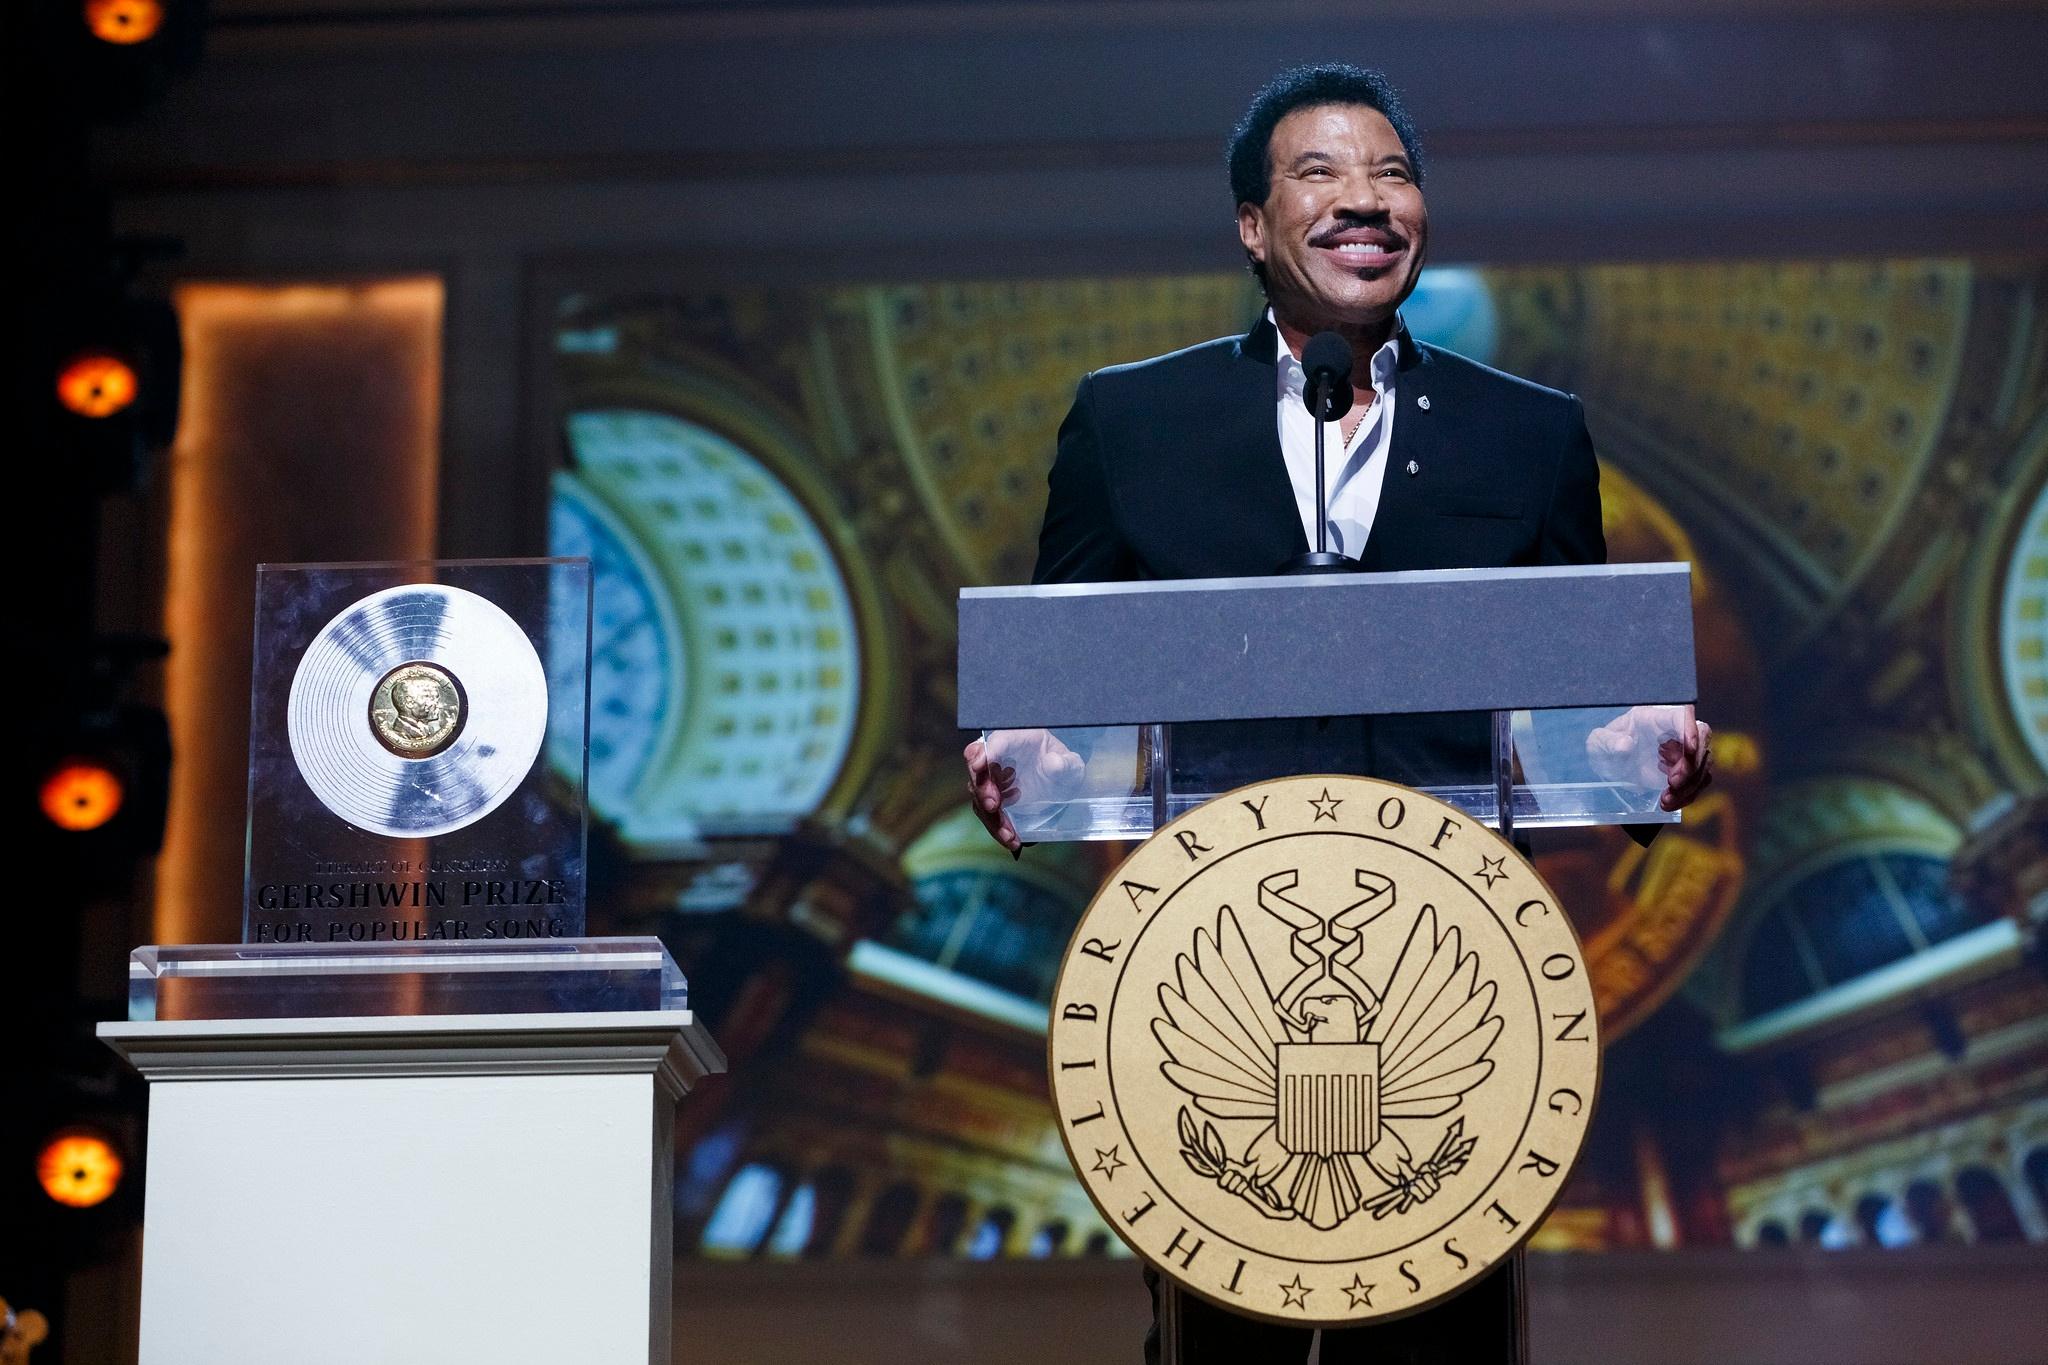 Lionel Richie accepts the 2022 Library of Congress Gershwin Prize for Popular Song 